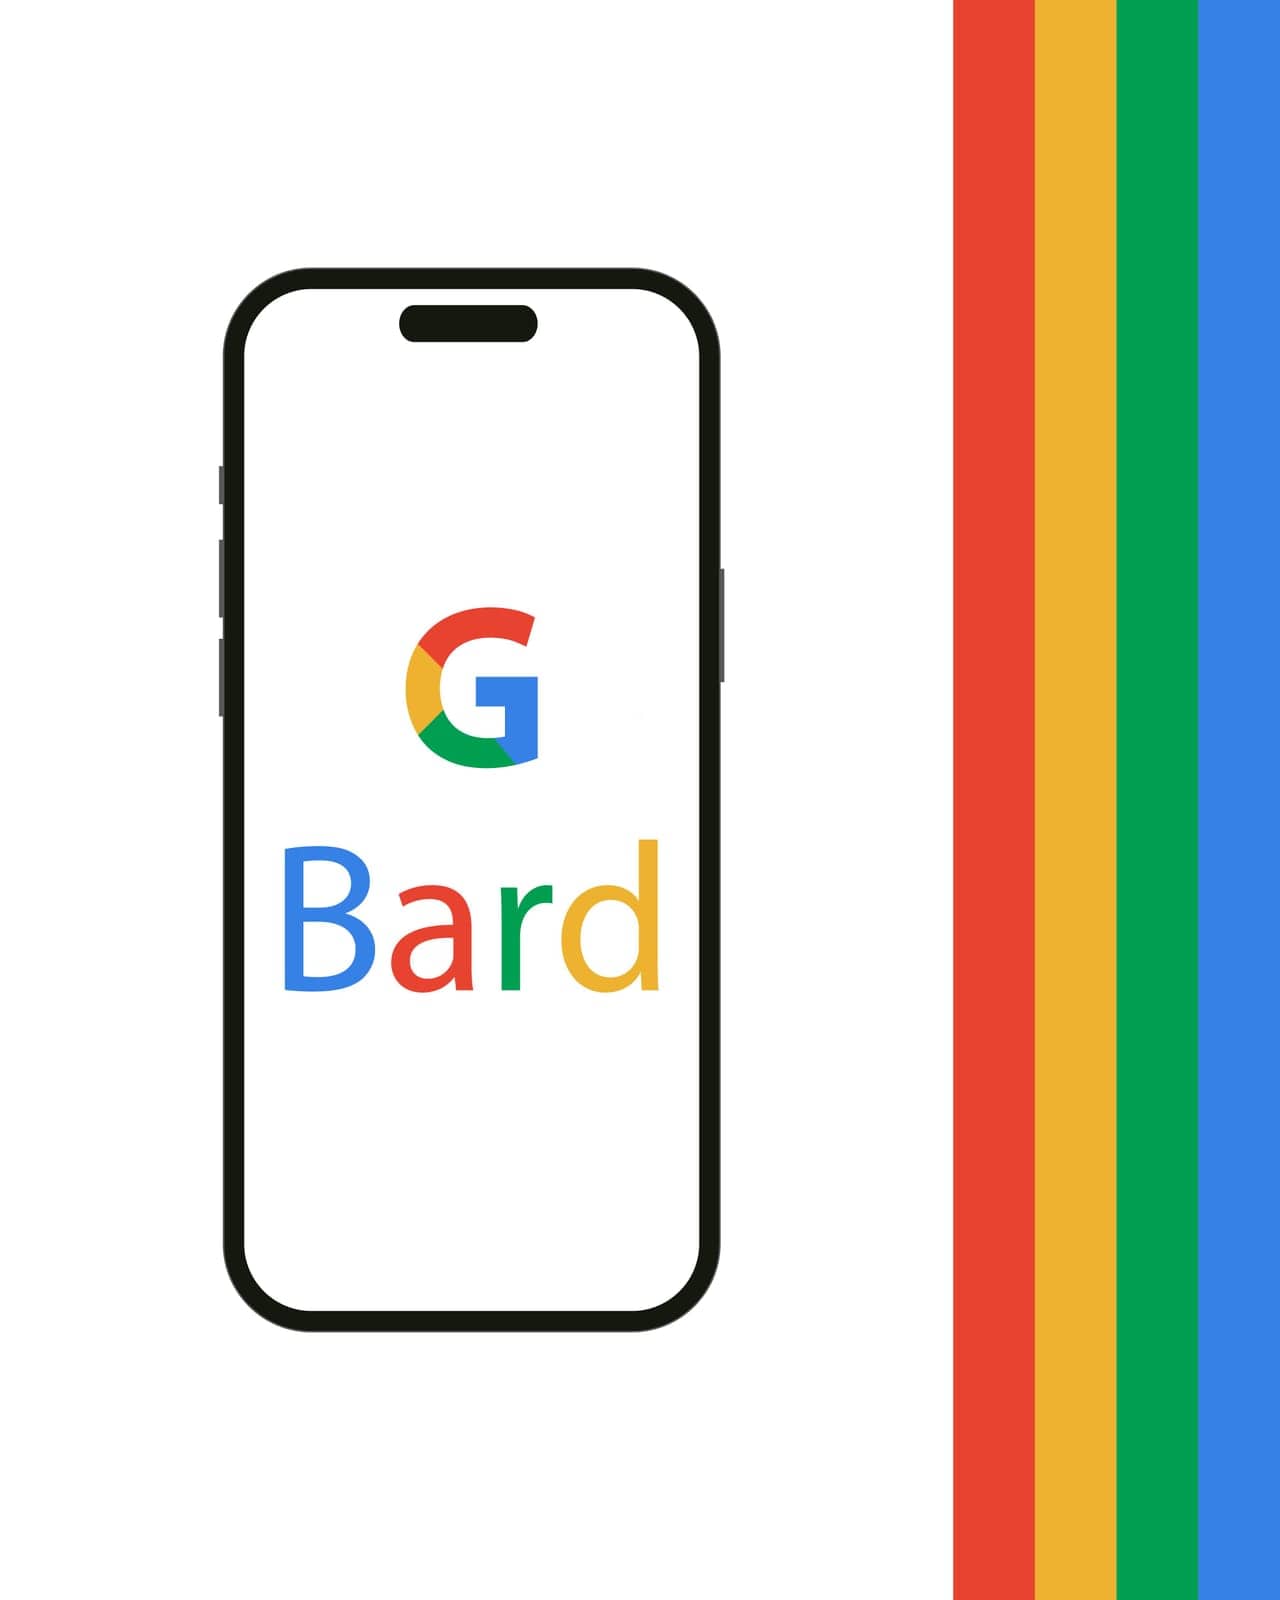 Kyiv, Ukraine - 03 June 2022: G Bard logo on Iphone 14 screen - vector illustration. Bard is a conversational generative artificial intelligence chatbot developed by Google on a smartphone and PC